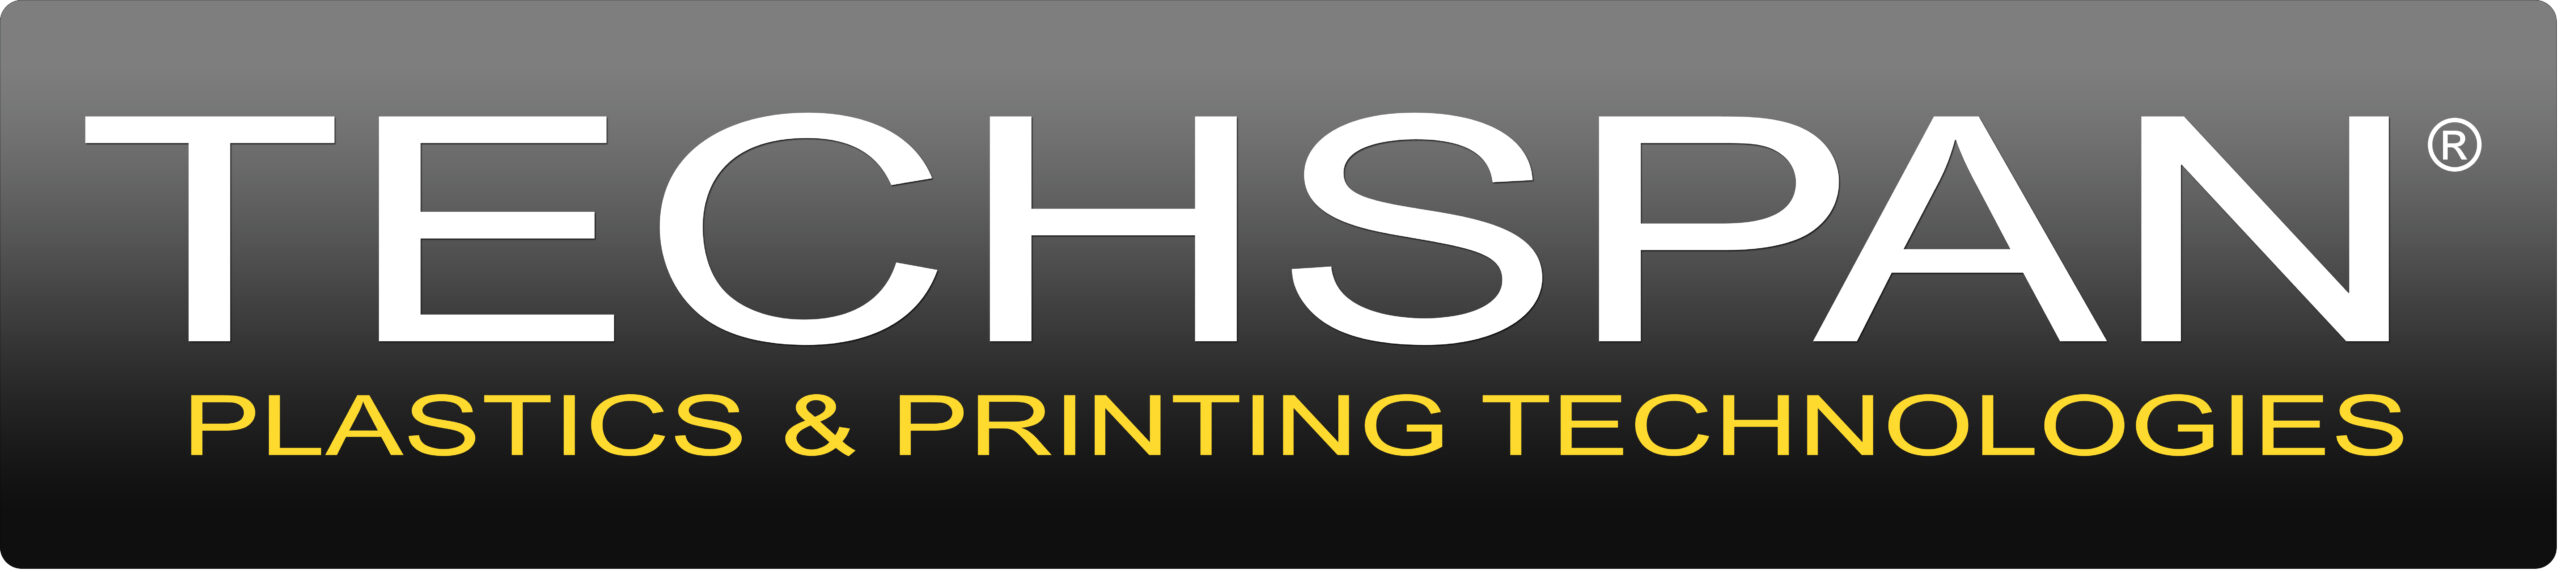 Techspan Industrial Printing Systems Limited